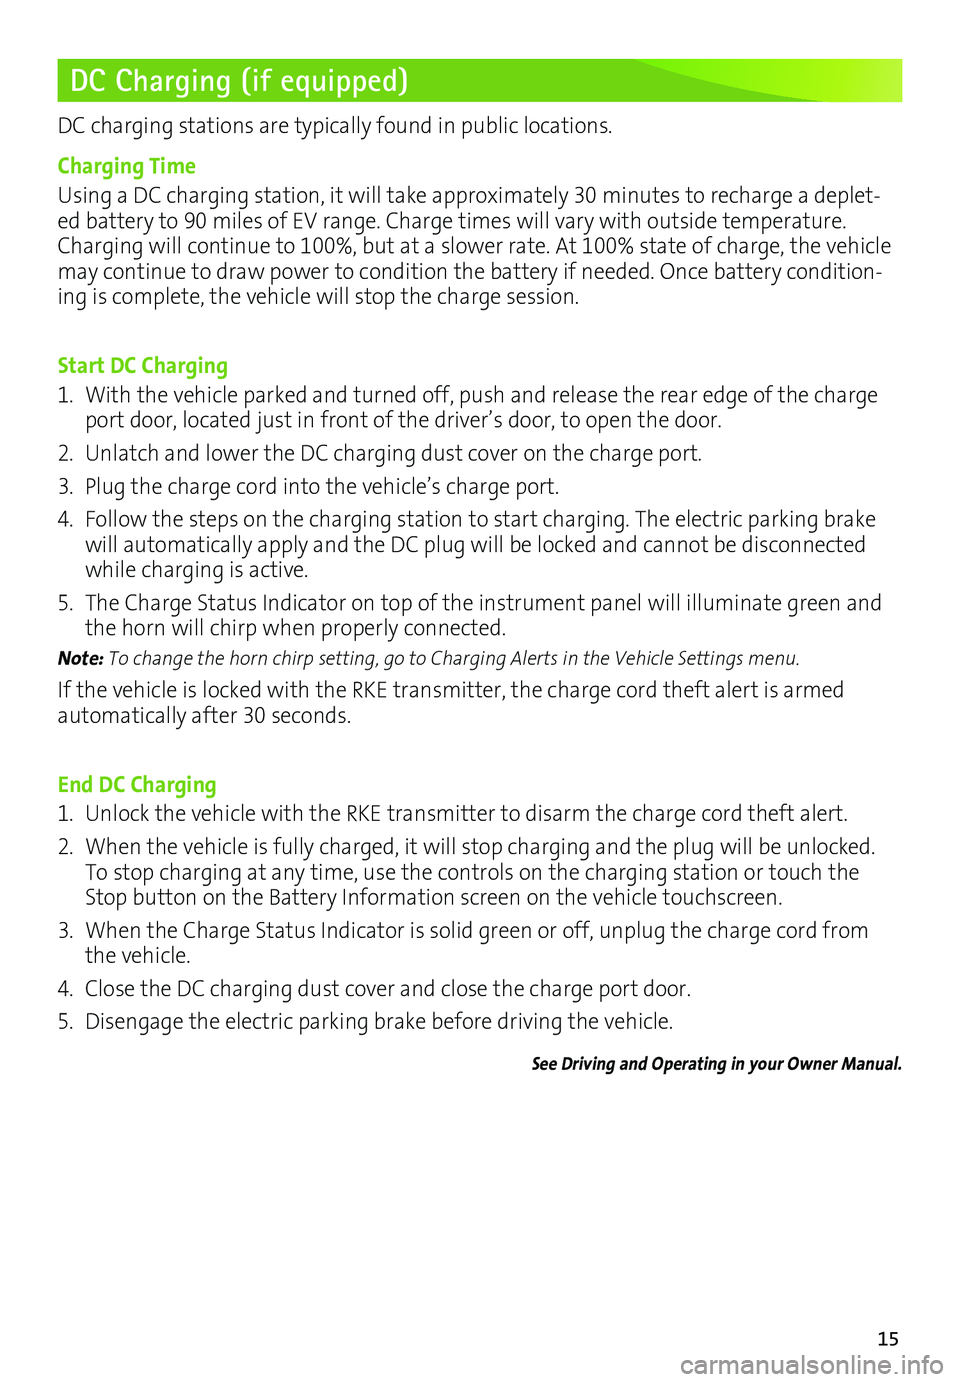 CHEVROLET BOLT EV 2017  Owners Manual 15
DC Charging (if equipped)
DC charging stations are typically found in public locations.
Charging Time
Using a DC charging station, it will take approximately 30 minutes to recharge a deplet-ed batt